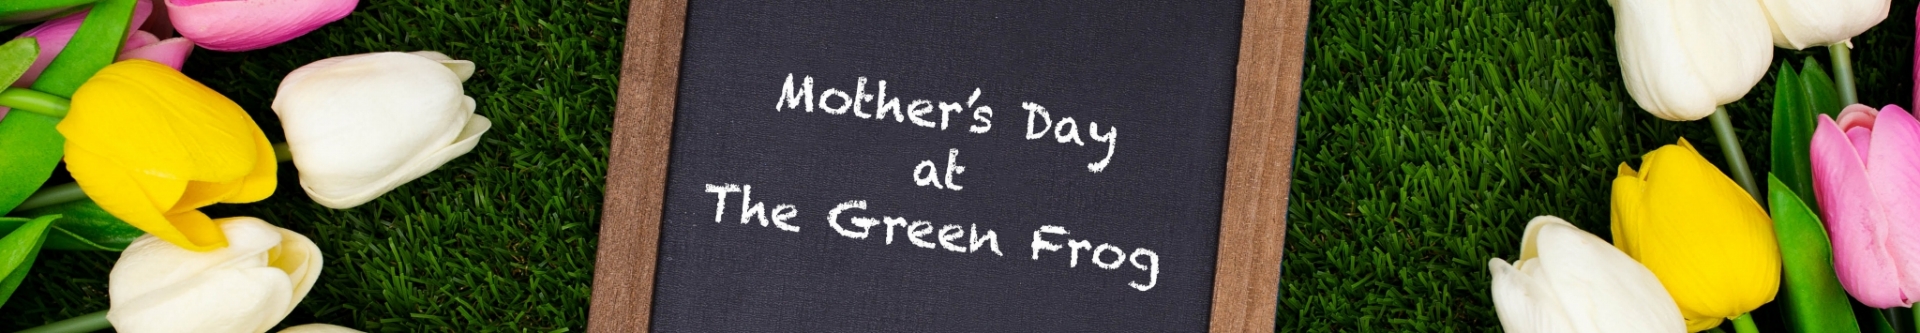 mothers day green frog